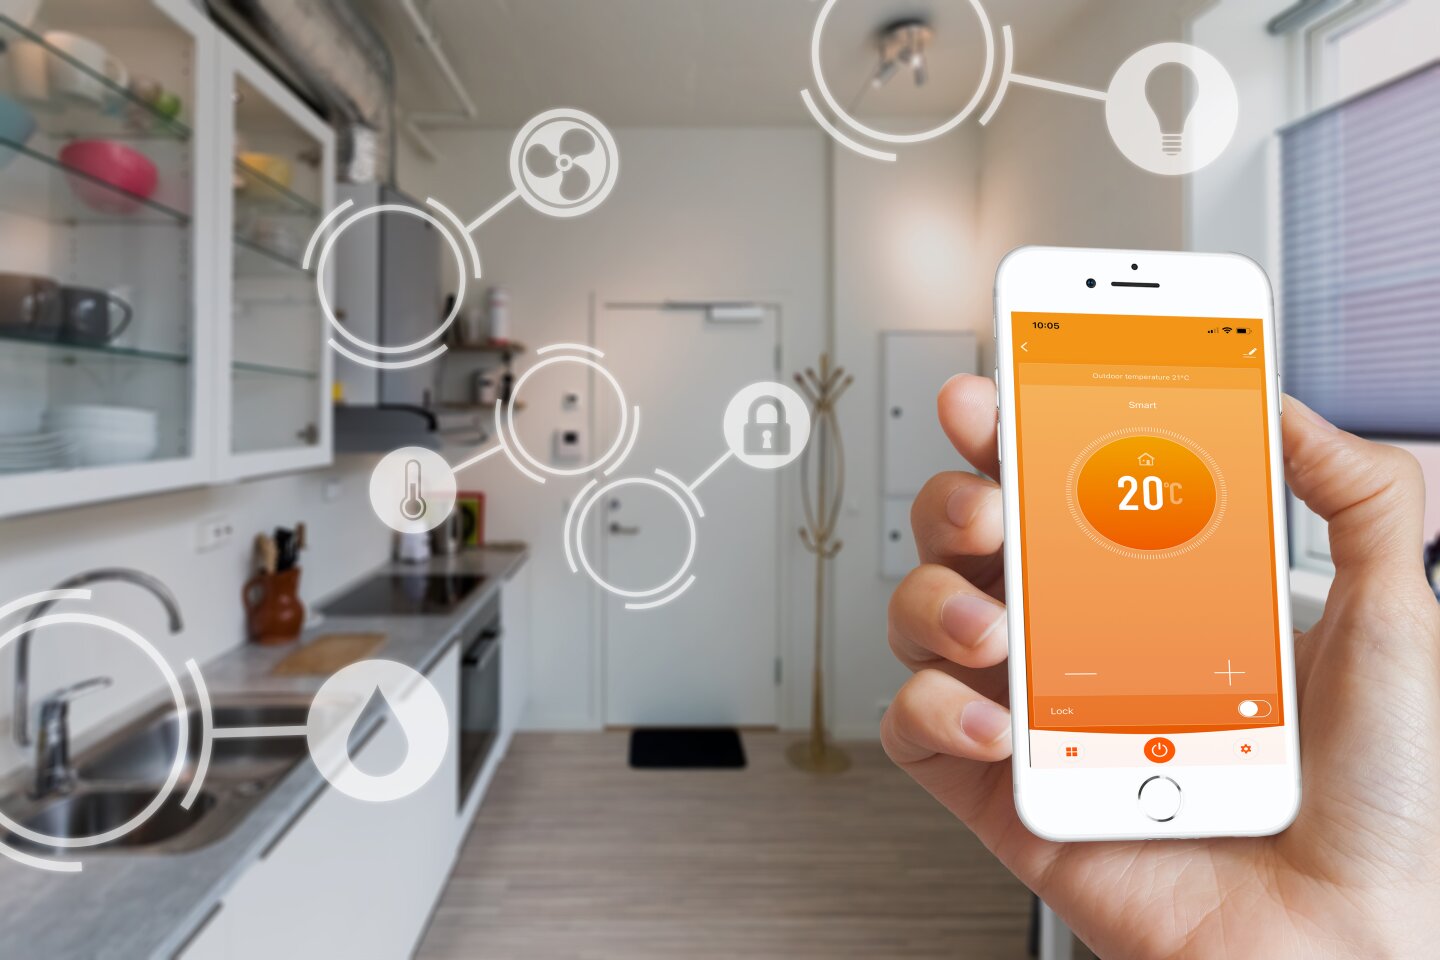 With Tuya Smart you control the different Smart Home components